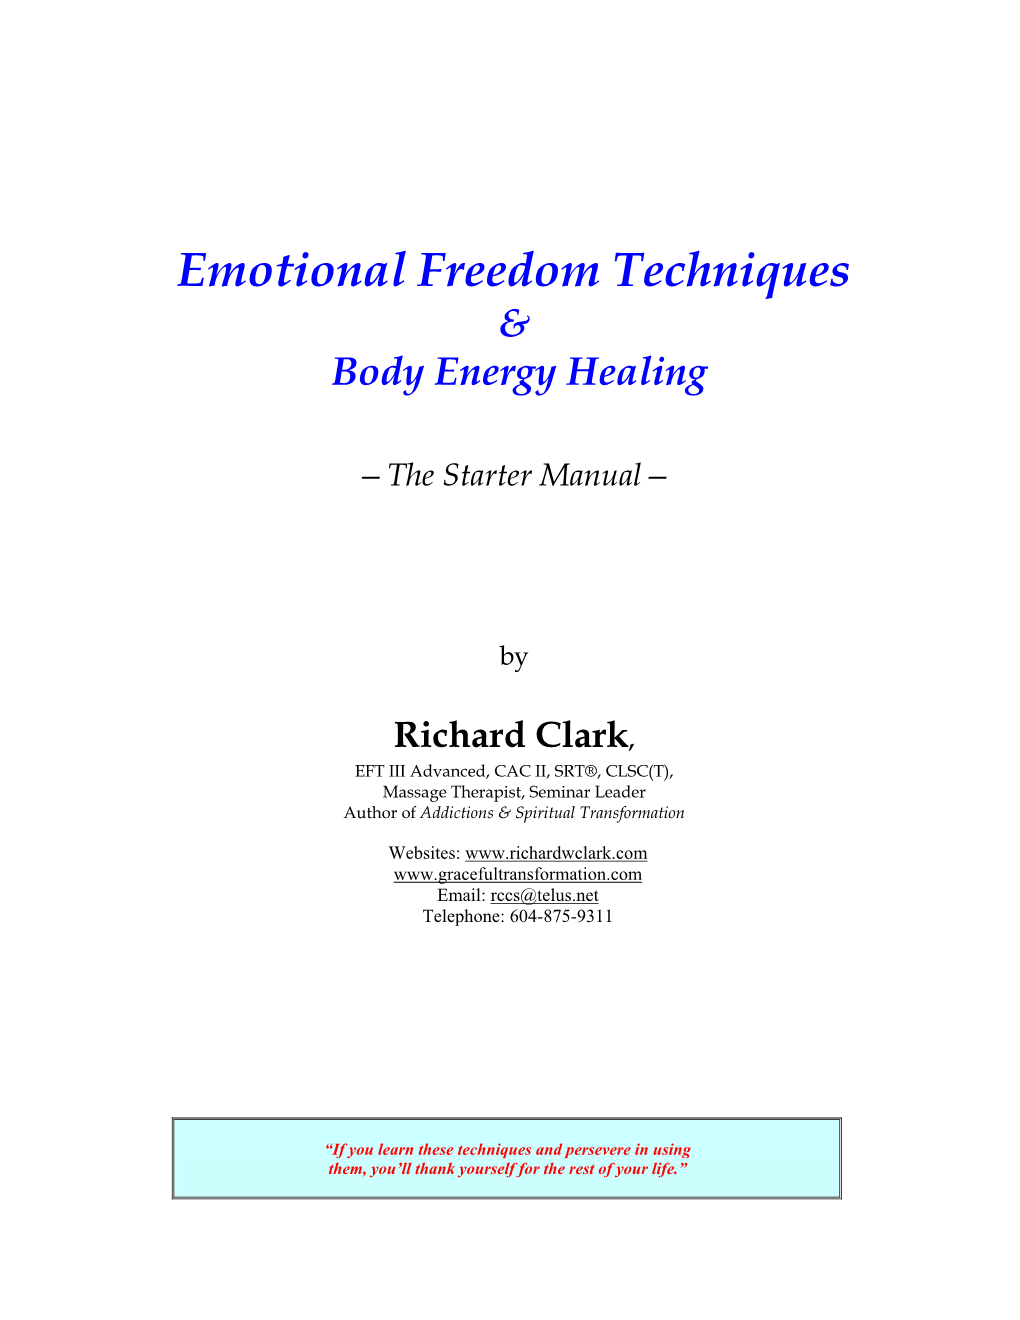 Emotional Freedom Techniques & Body Energy Healing